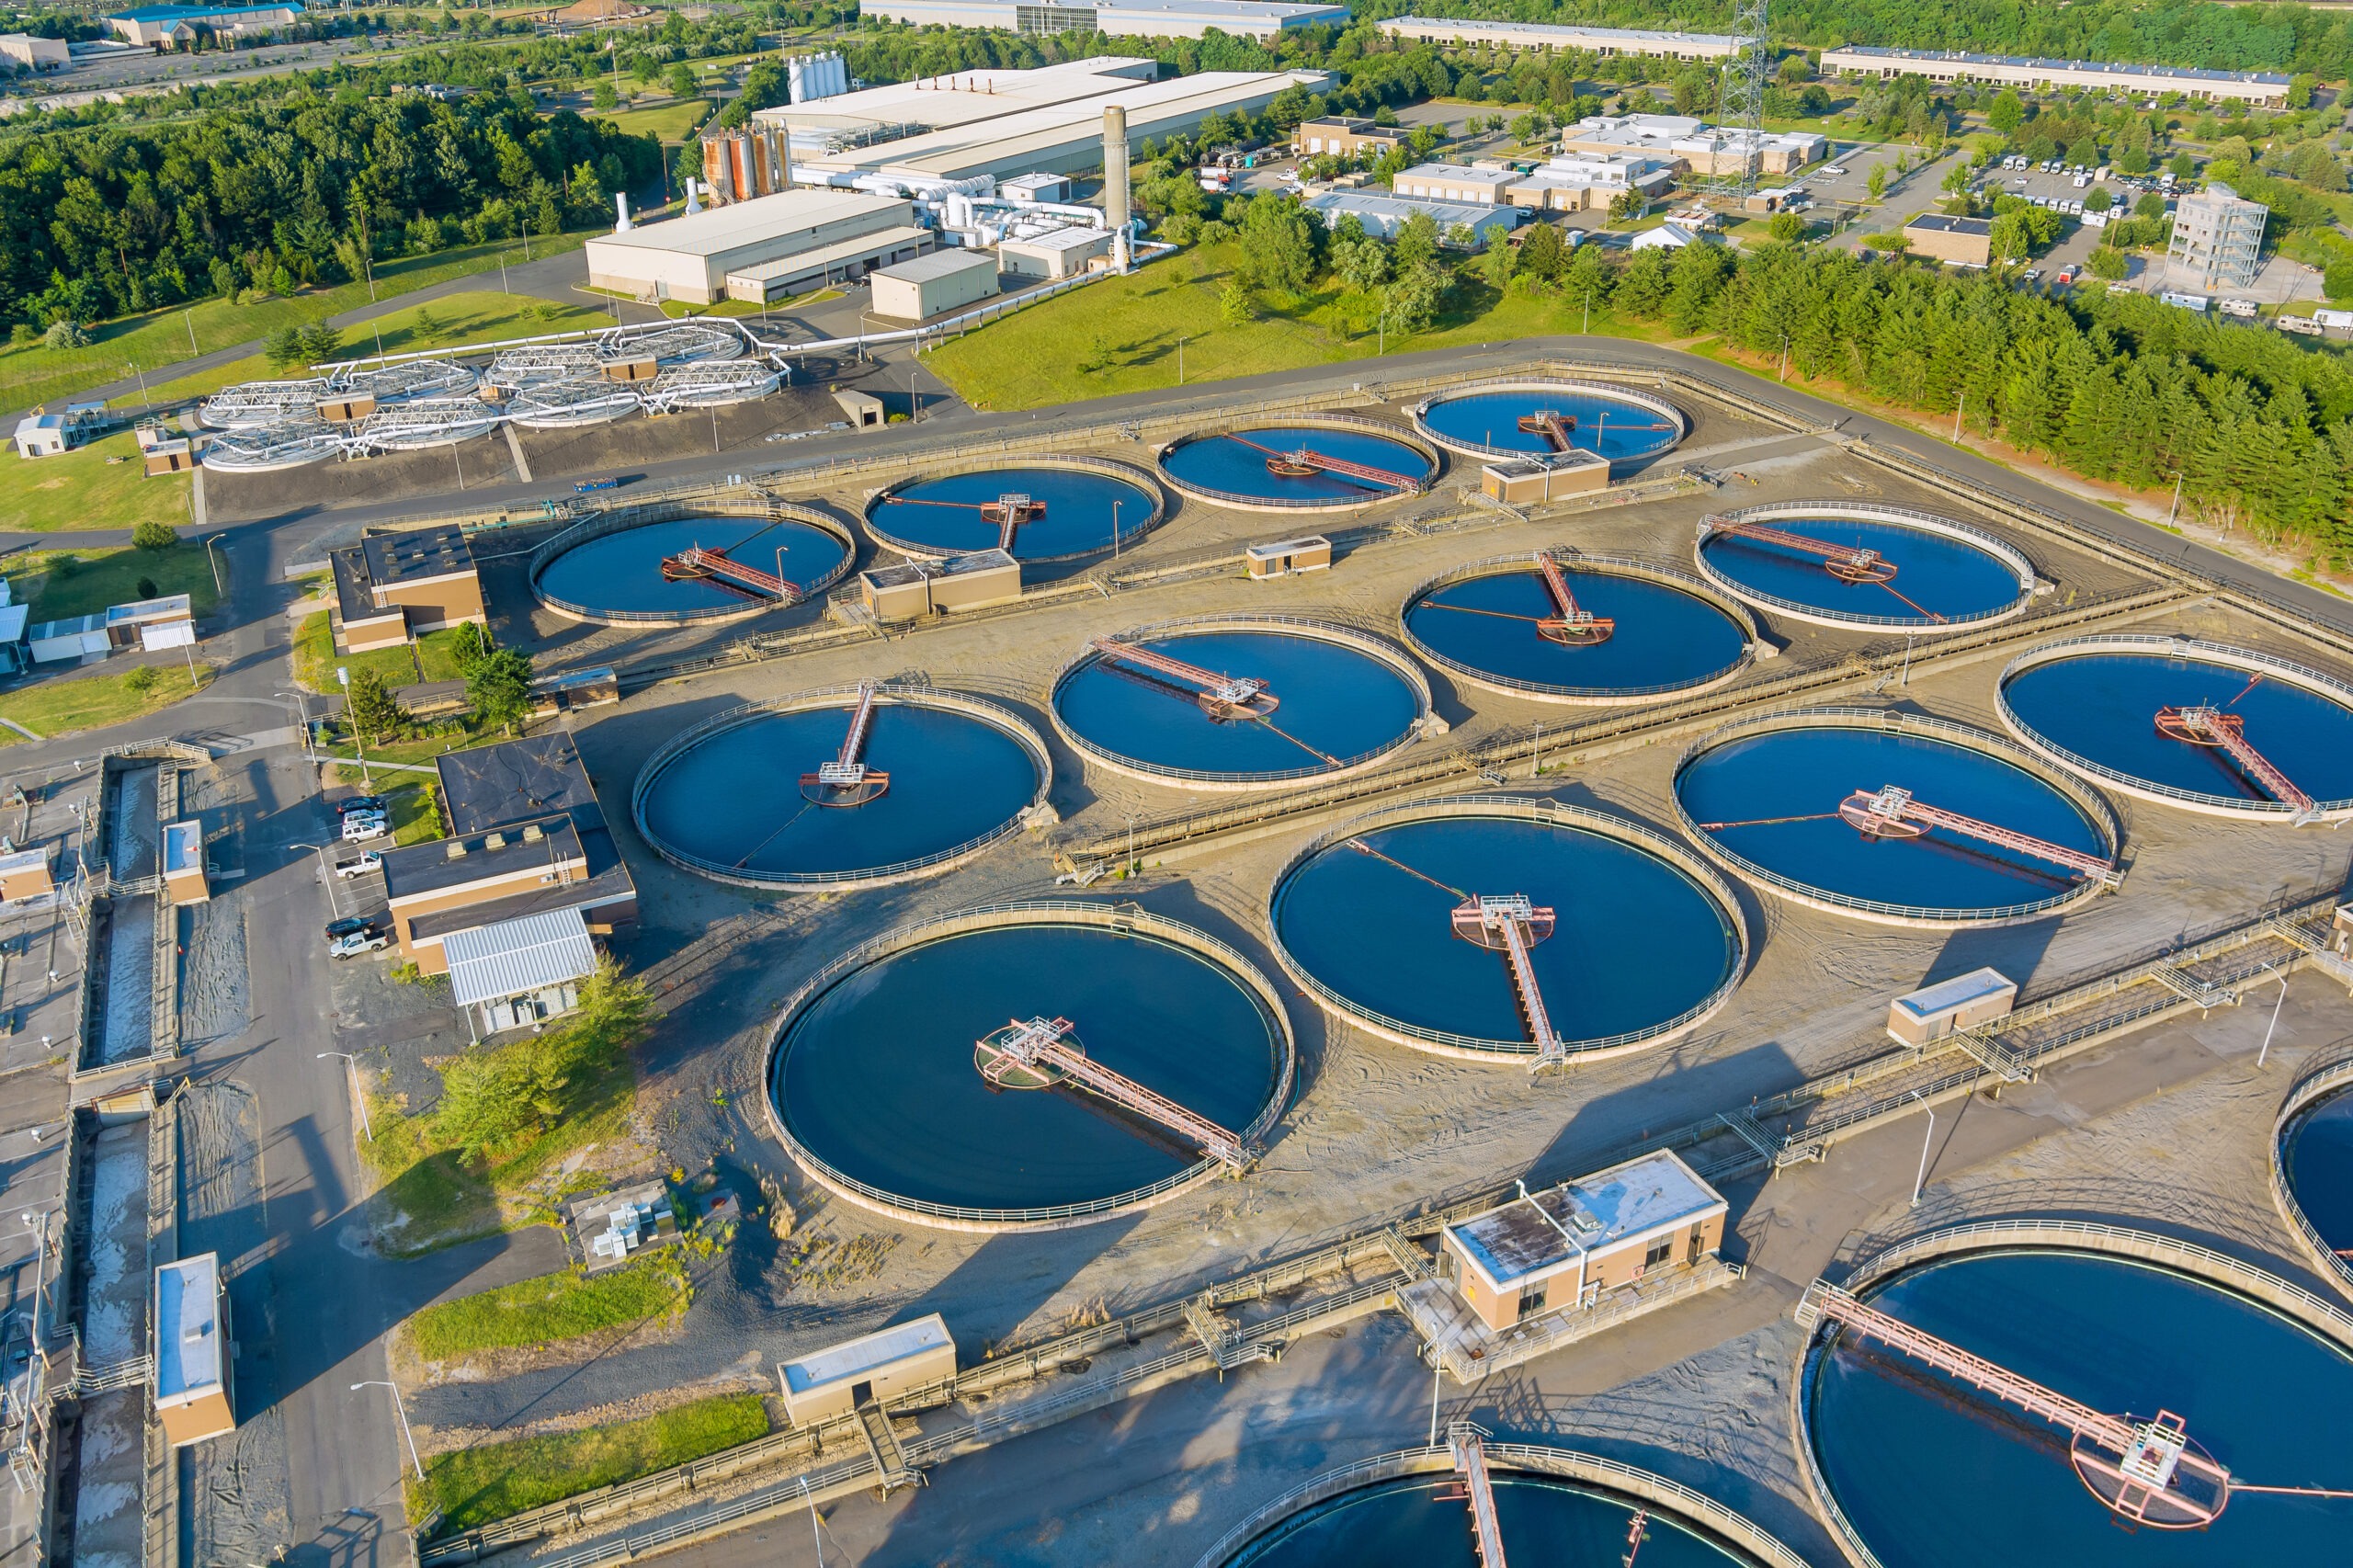 Wastewater treatment infrastructure the treatment facilities with aerial view